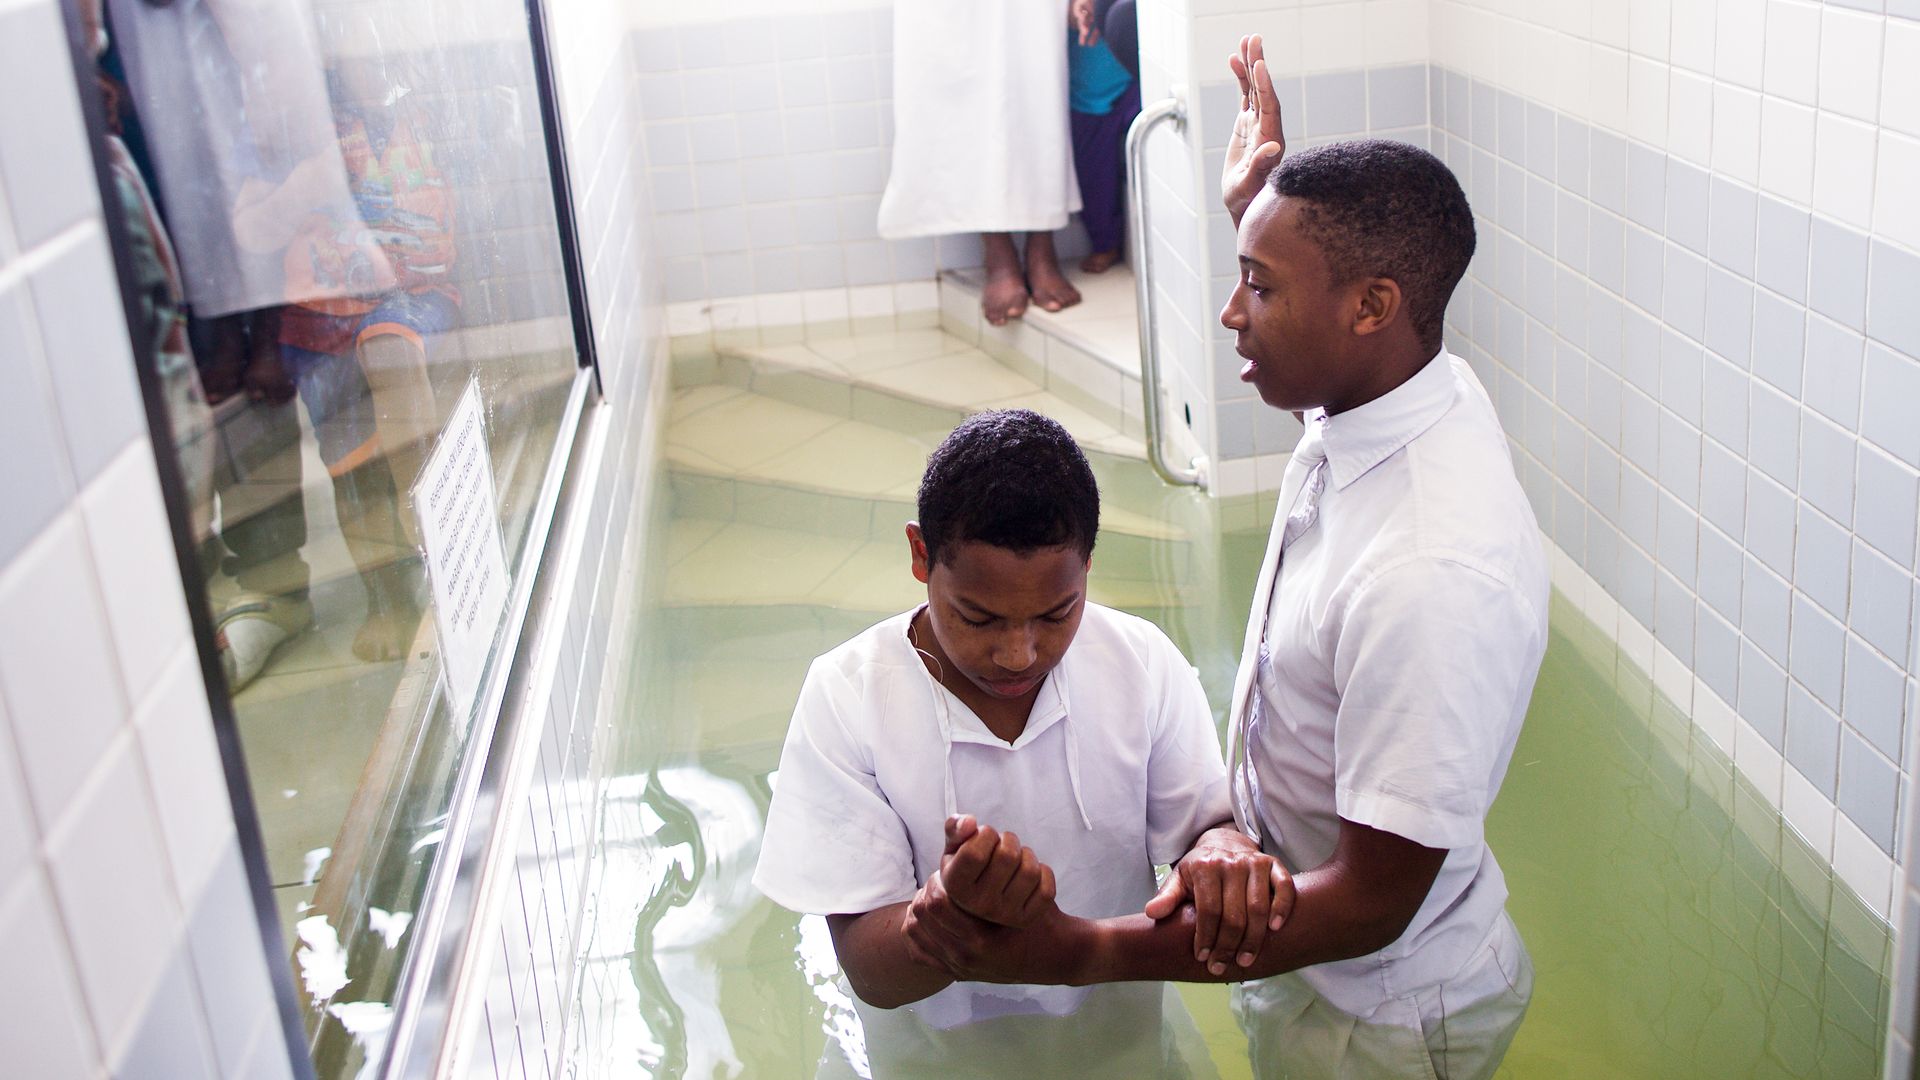 A young man being baptized in a baptismal font in Madagascar.